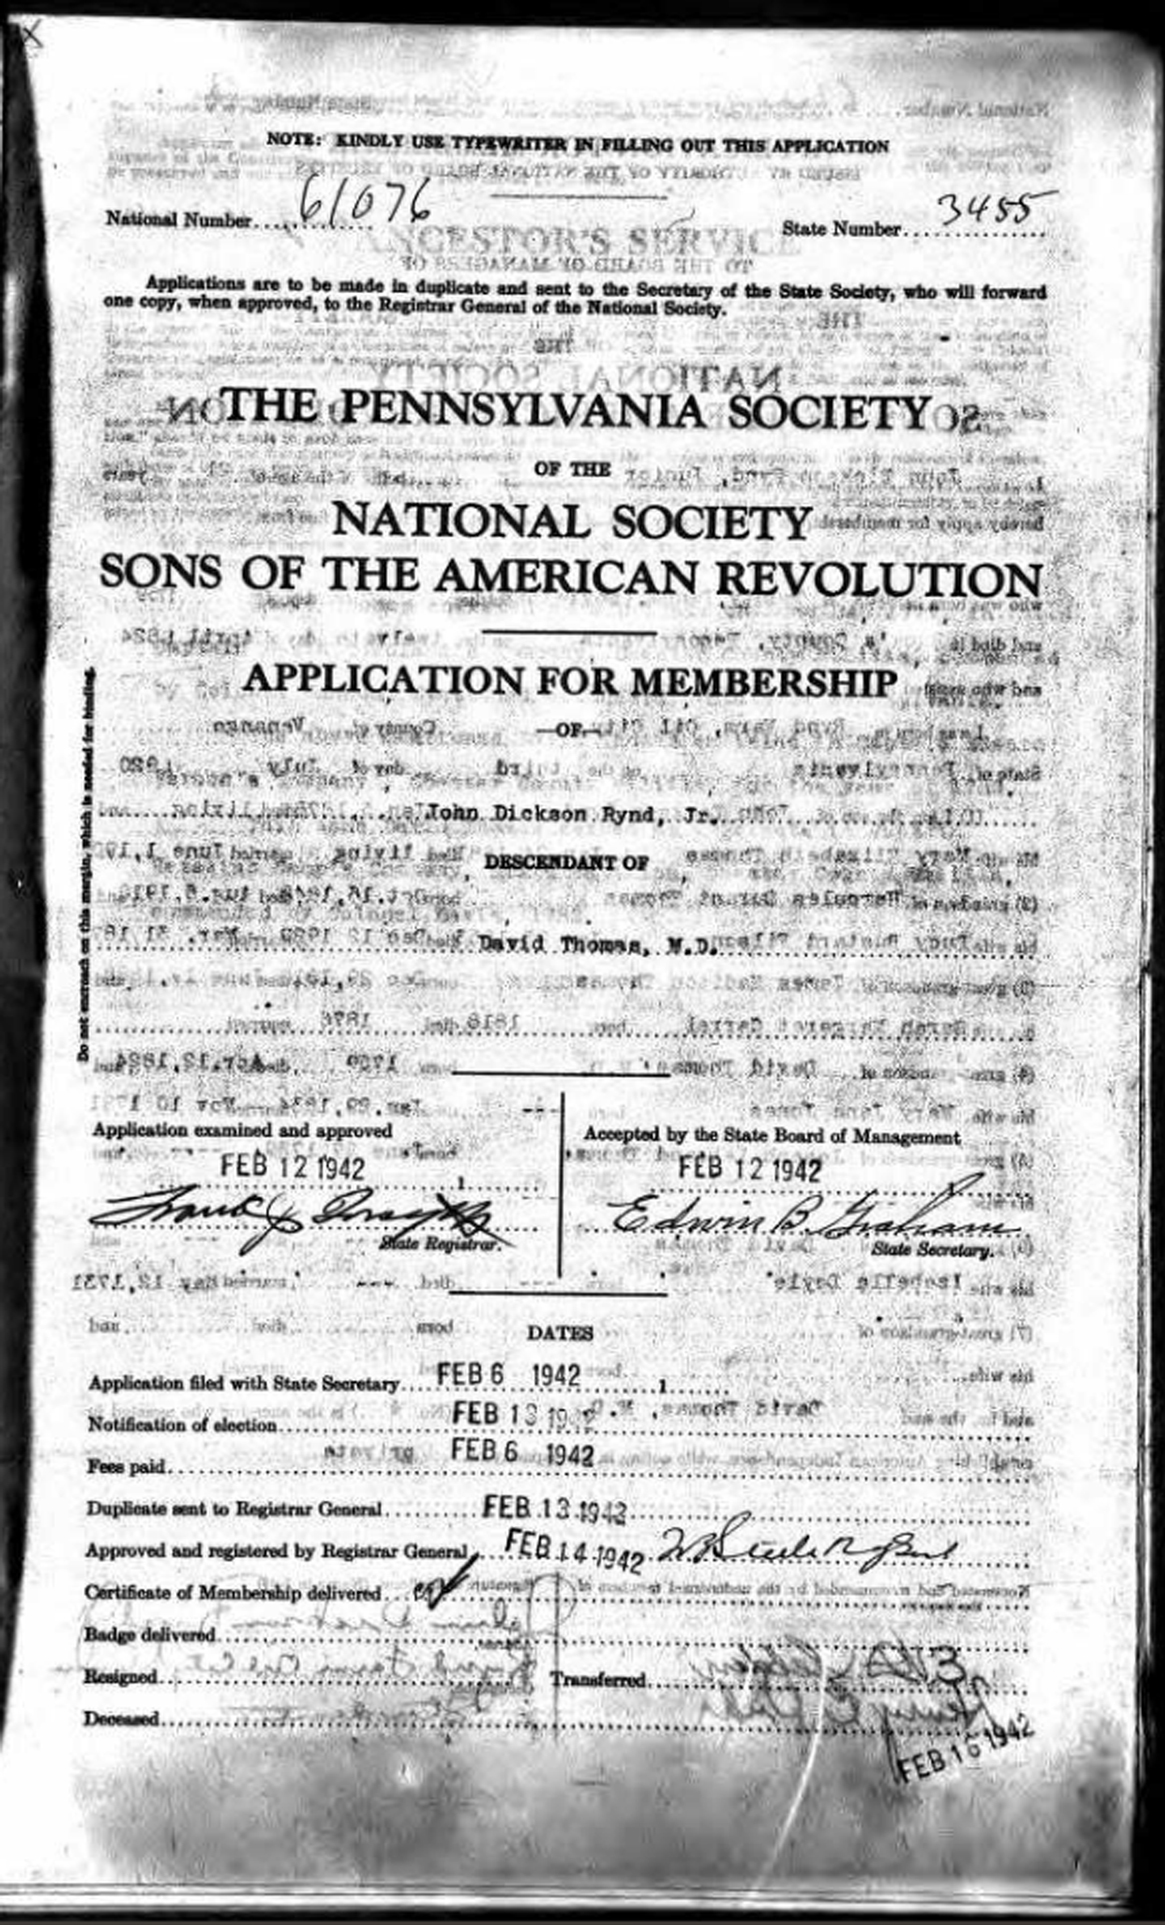 Sons of the American Revolution Application by John Dickson Rynd, Jr.